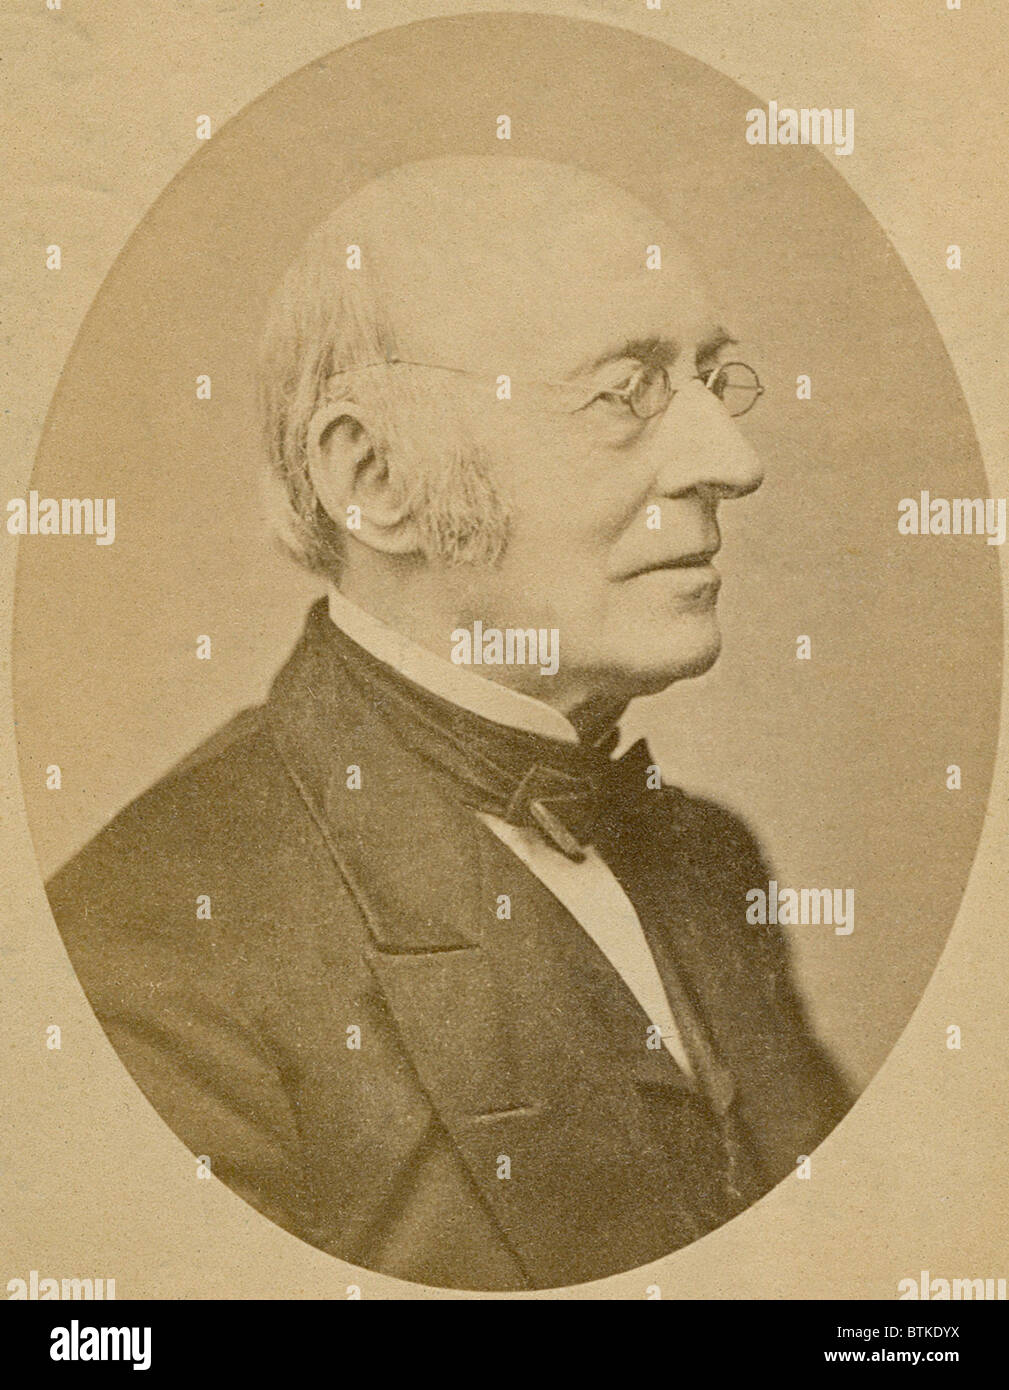 William Lloyd Garrison (1805-1879), joined the Abolitionist movement at age 25 and he founded THE LIBERATOR, an antislavery newspaper. He was most influential in the 1830s, but his increasing radicalism, advocating the North secede from a nation tainted by slavery, undermined his influence in the 1840s and 1850s. Photo ca. 1855. Stock Photo